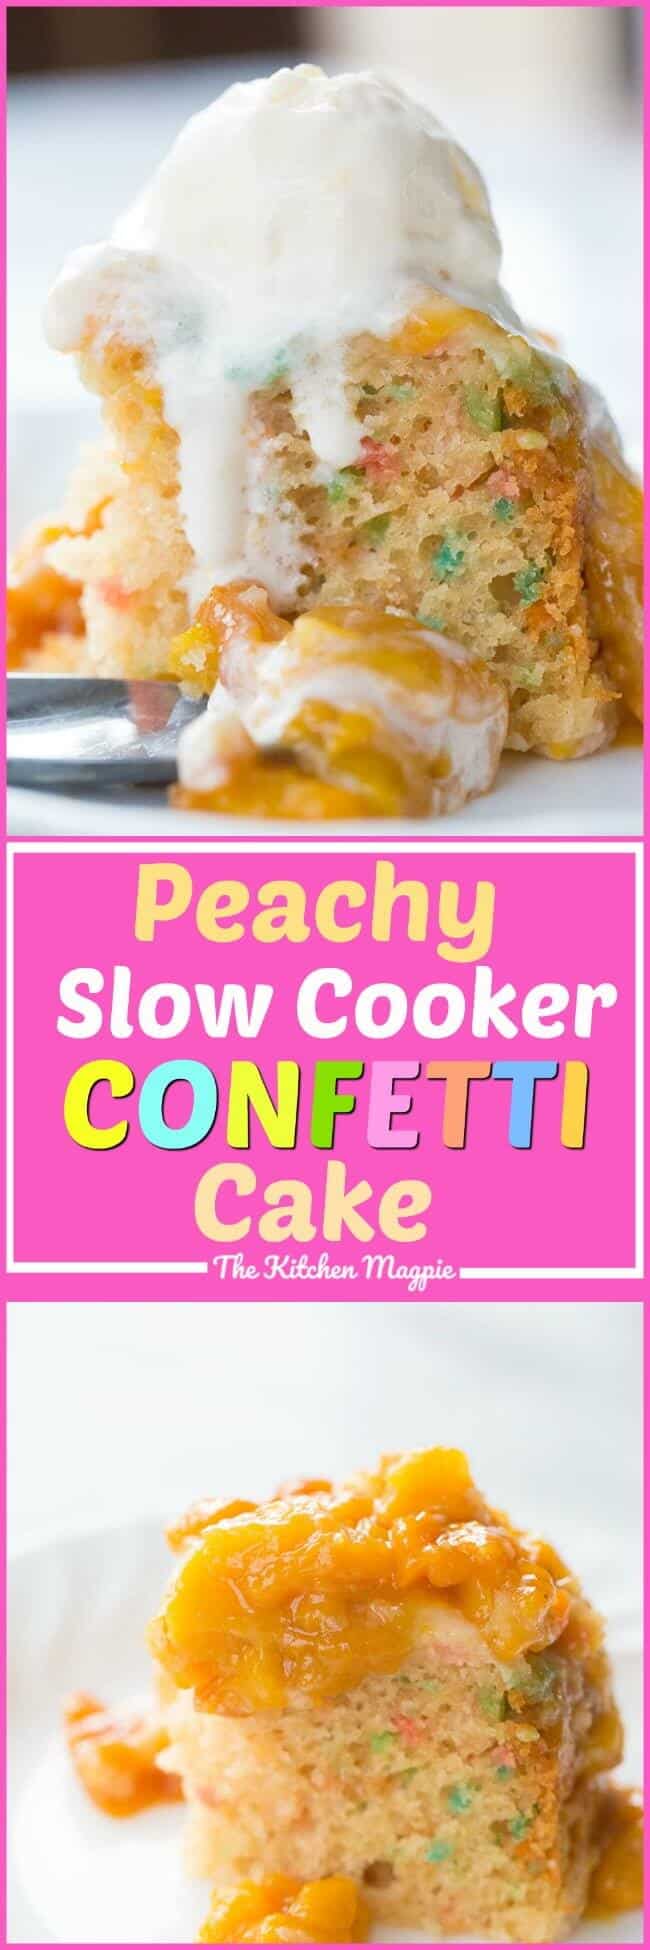 This Peachy Slow Cooker Confetti Cake is so easy to make - and talk about delicious! Canned peaches give this slow cooker cake an extra taste boost! #crockpot #slowcooker #cake #peaches #recipes